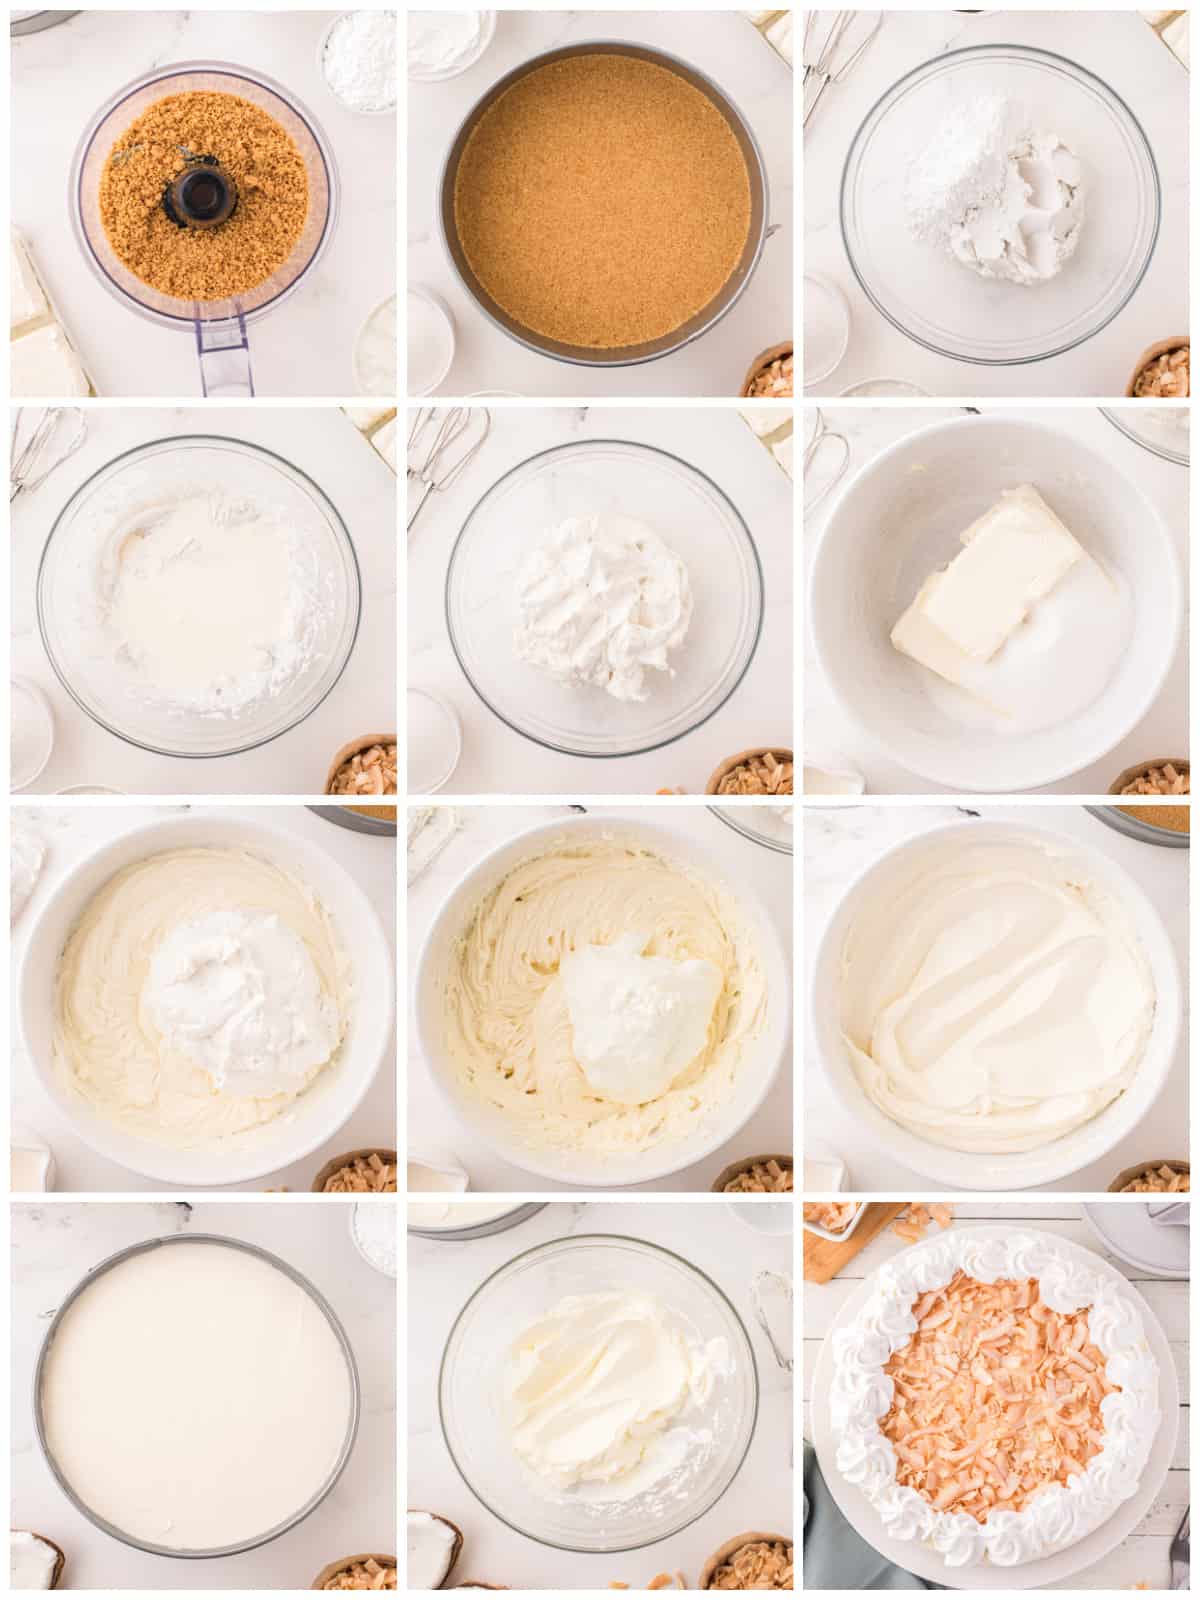 Step by step photos on how to make a No Bake Coconut Cheesecake.